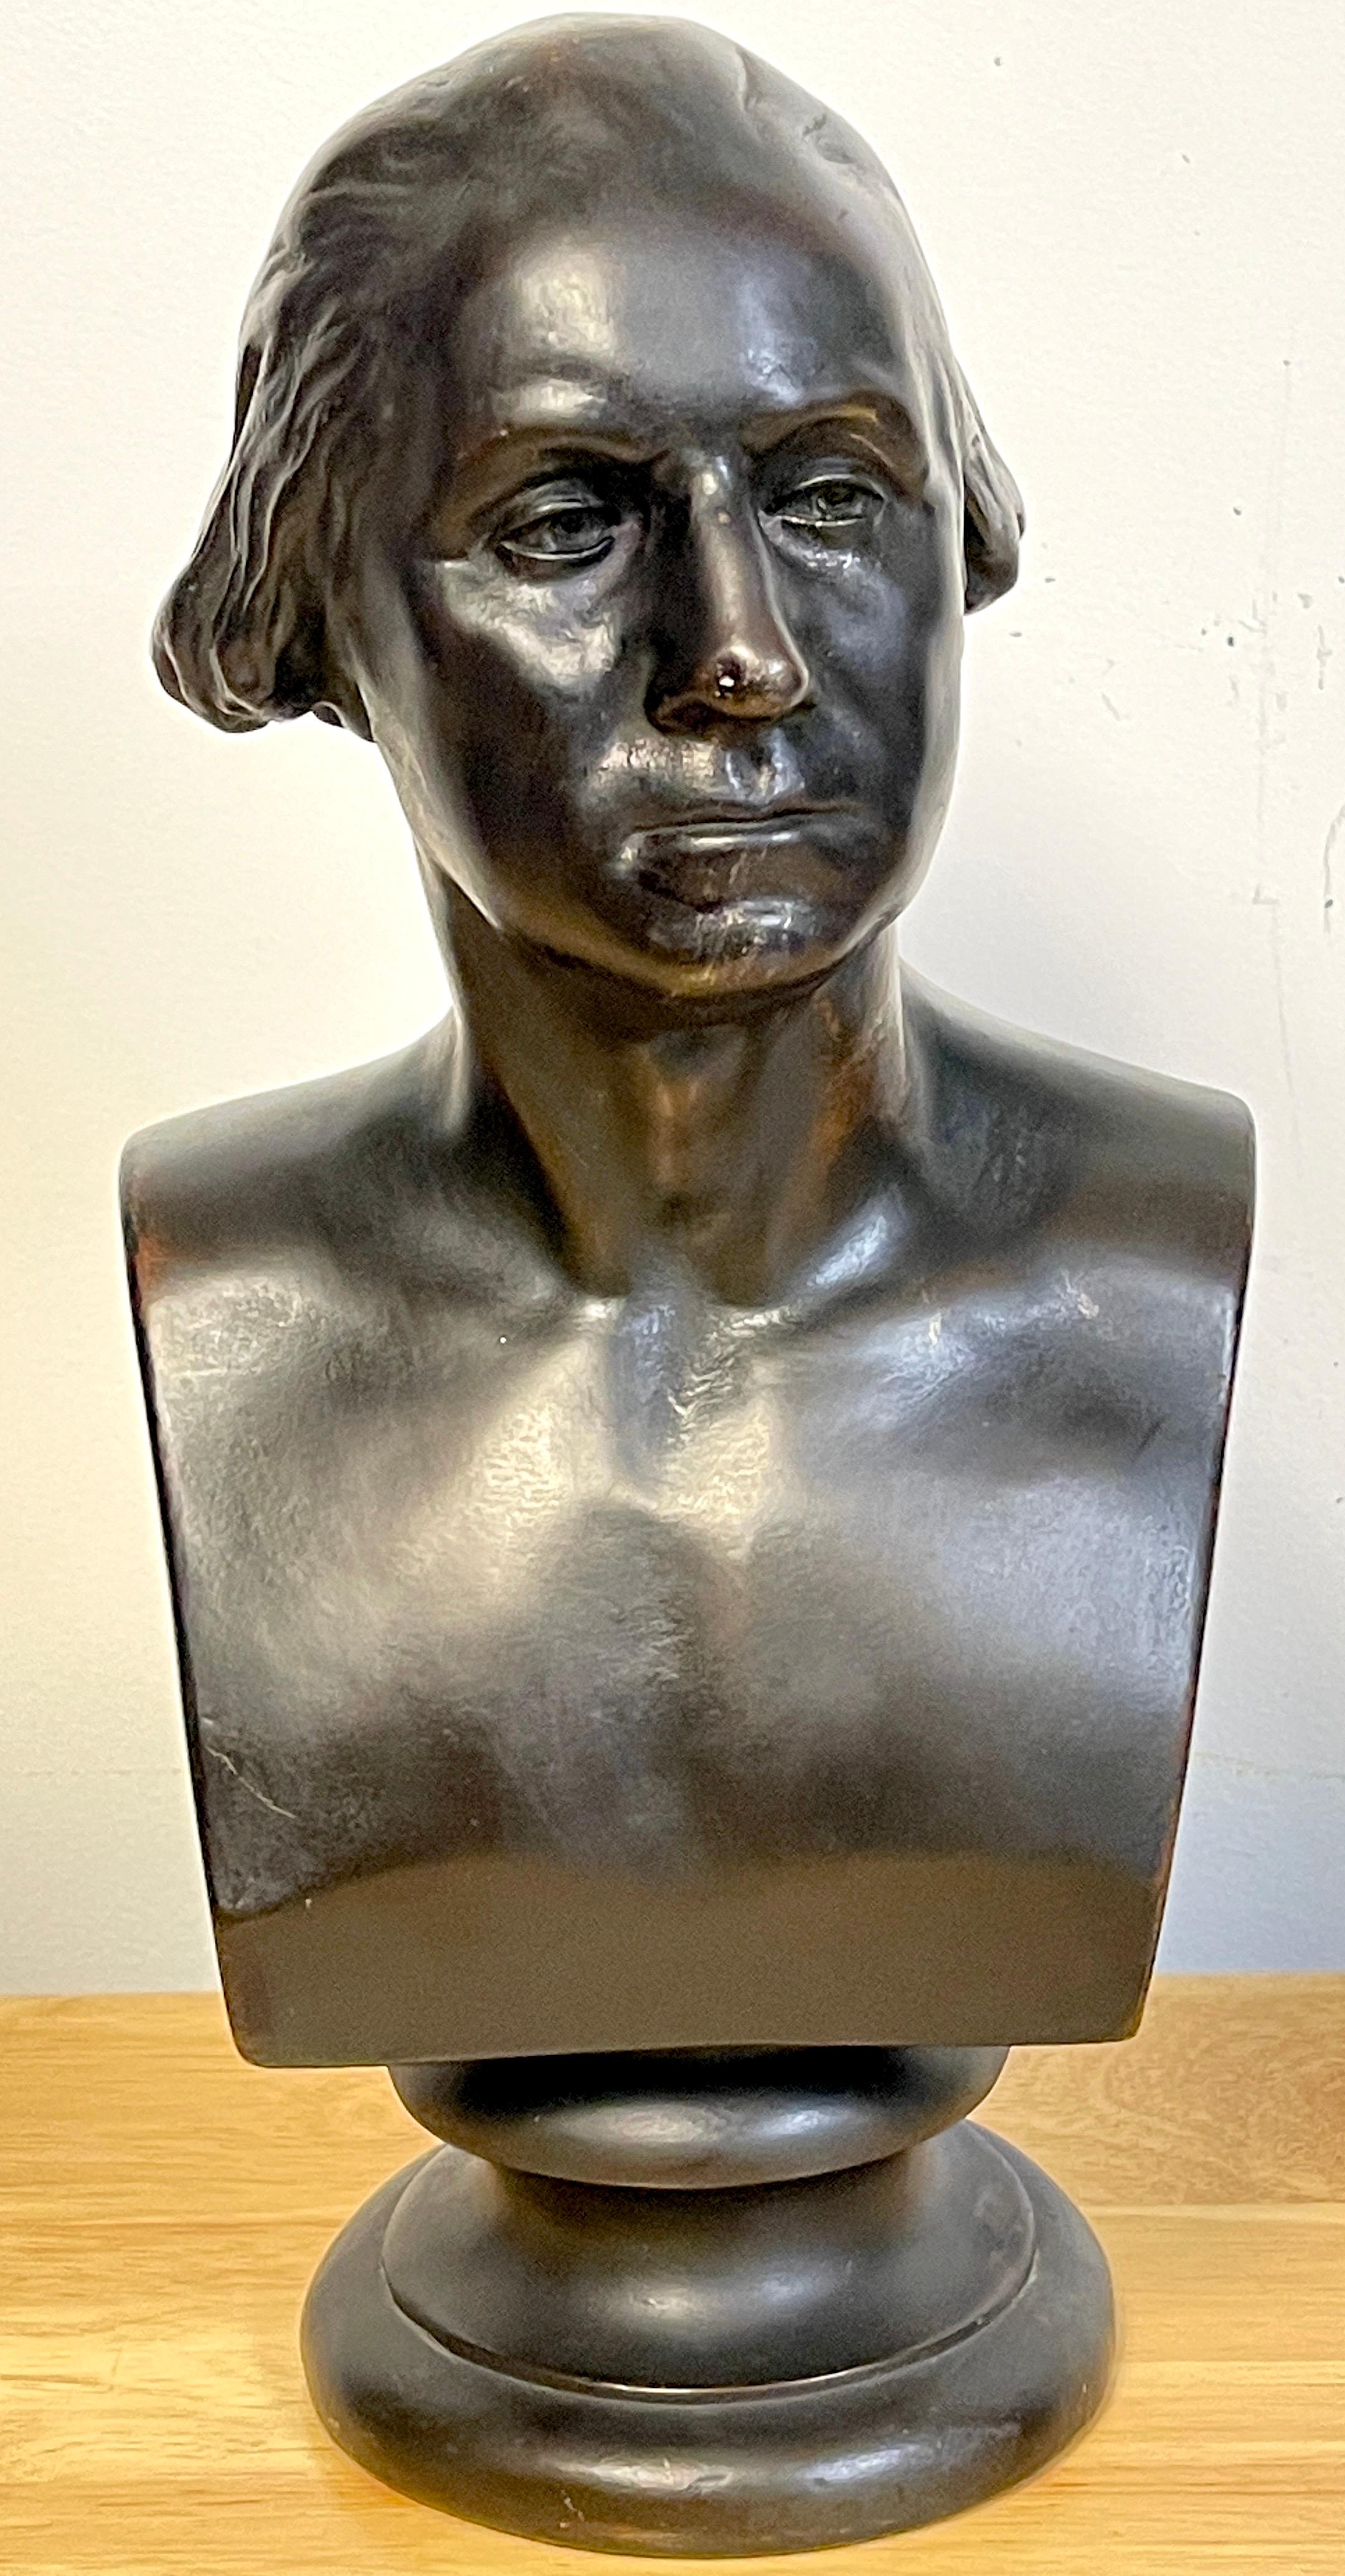 George Washington Statues and Busts - 11 For Sale on 1stDibs 